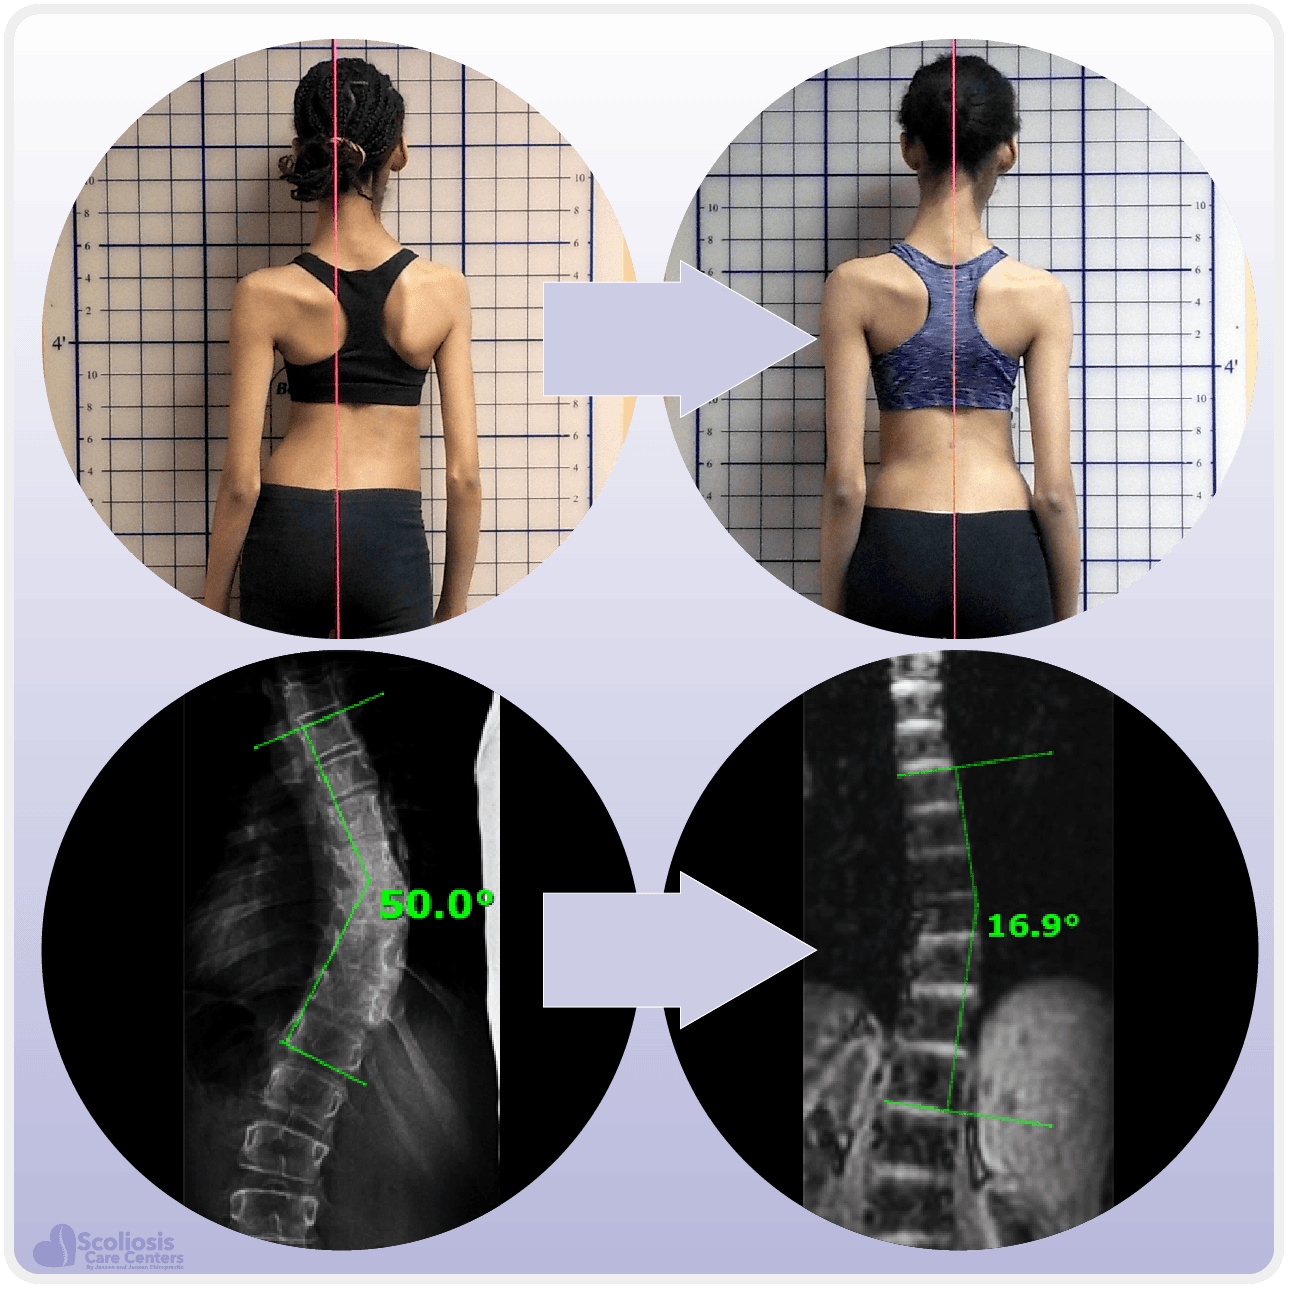 Scoliosis, Brace or Surgery?